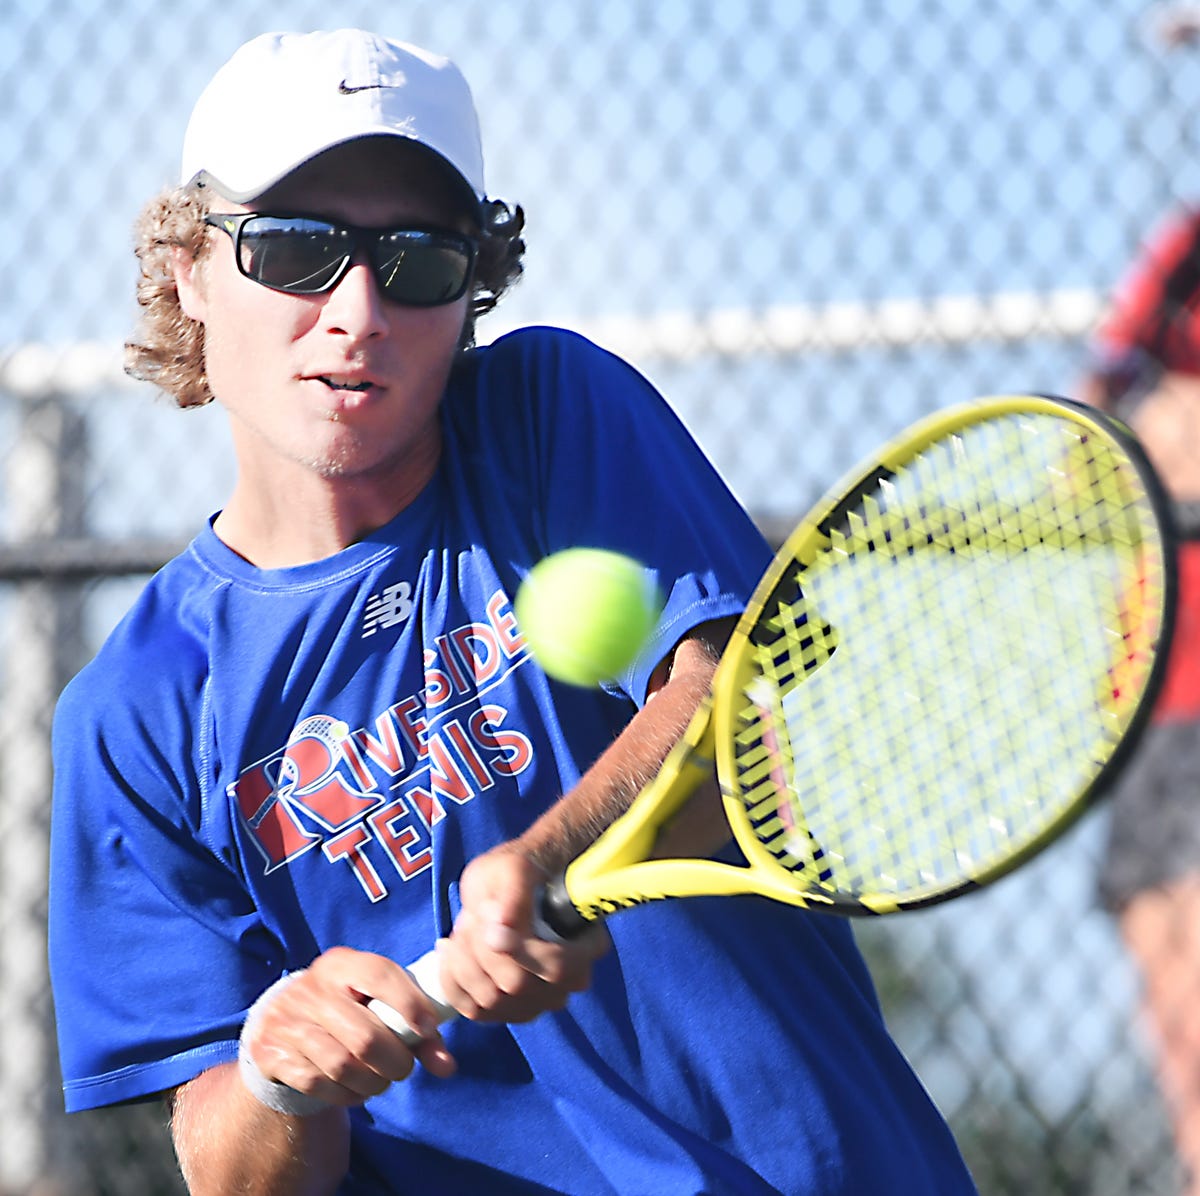 Riverside high school boys tennis state title match postponed by weather conditions